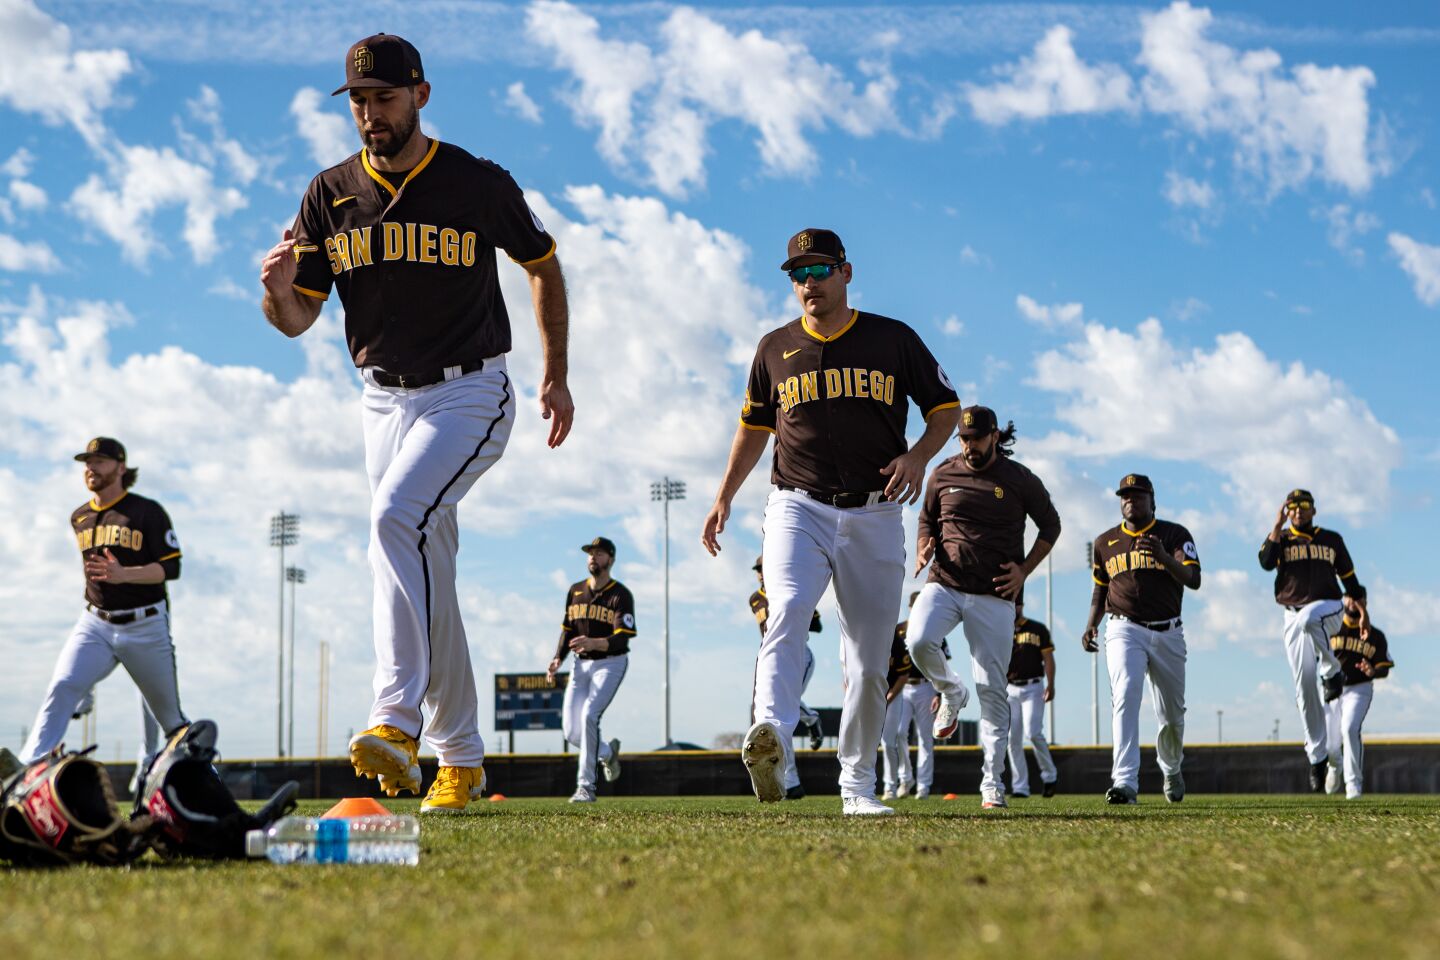 Padres starting pitcher Michael Wacha (52), center left, and pitchers stretch during a spring training practice at the Peoria Sports Complex on Sunday, Feb. 19, 2023 in Peoria, AZ.